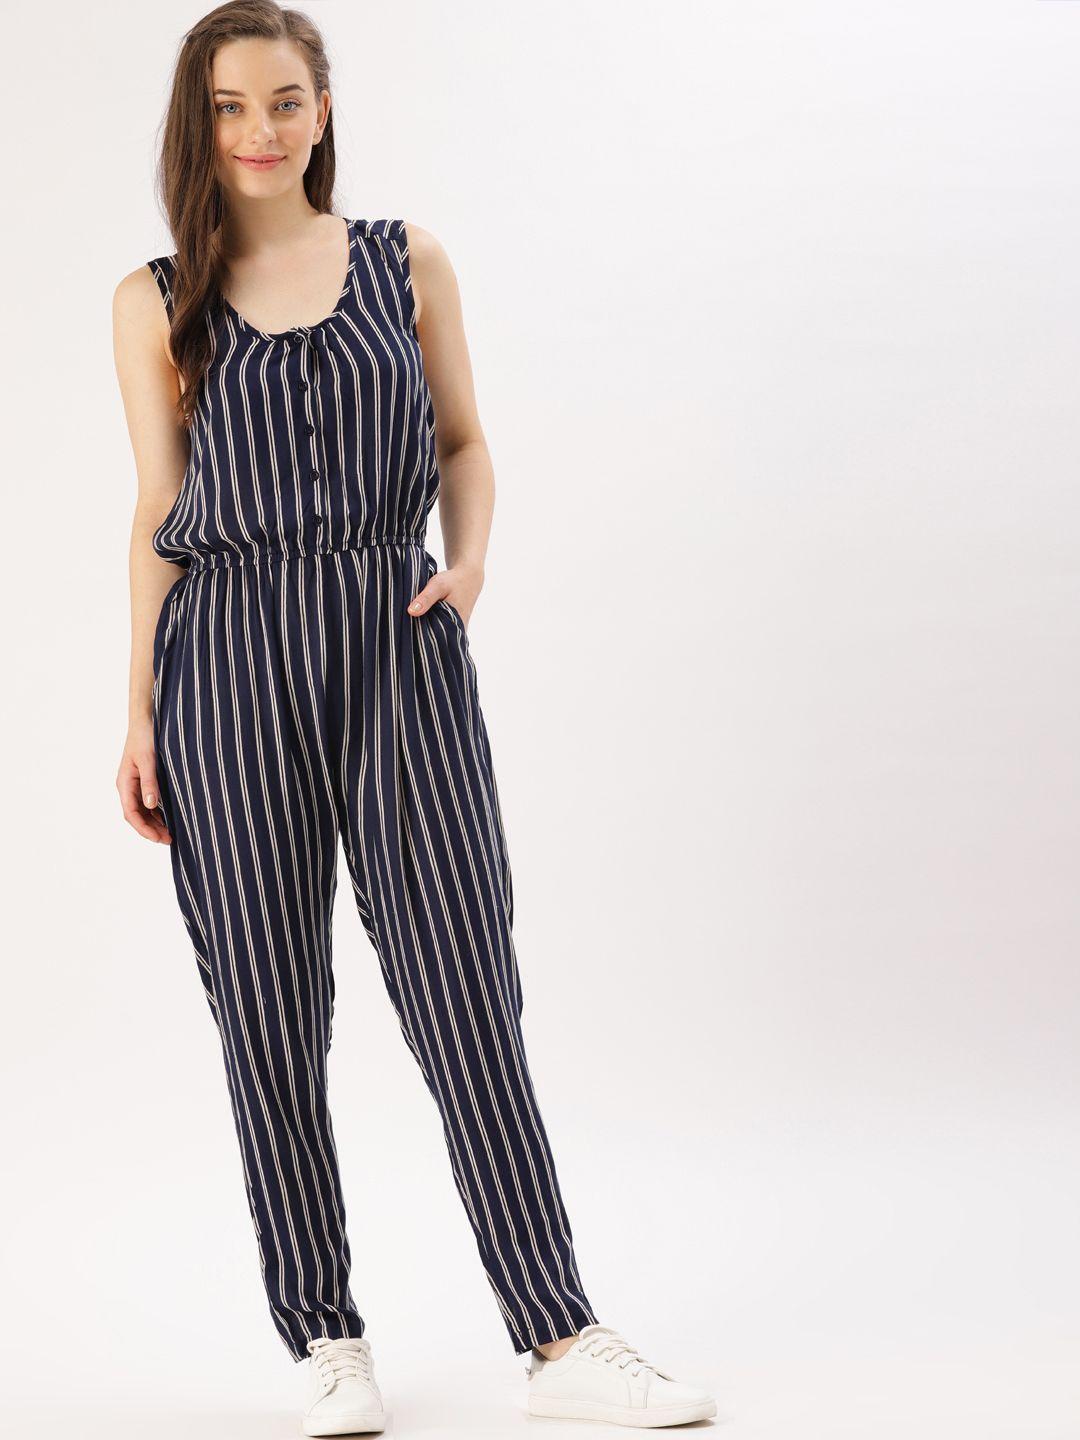 dressberry-navy-blue-&-off-white-striped-basic-jumpsuit